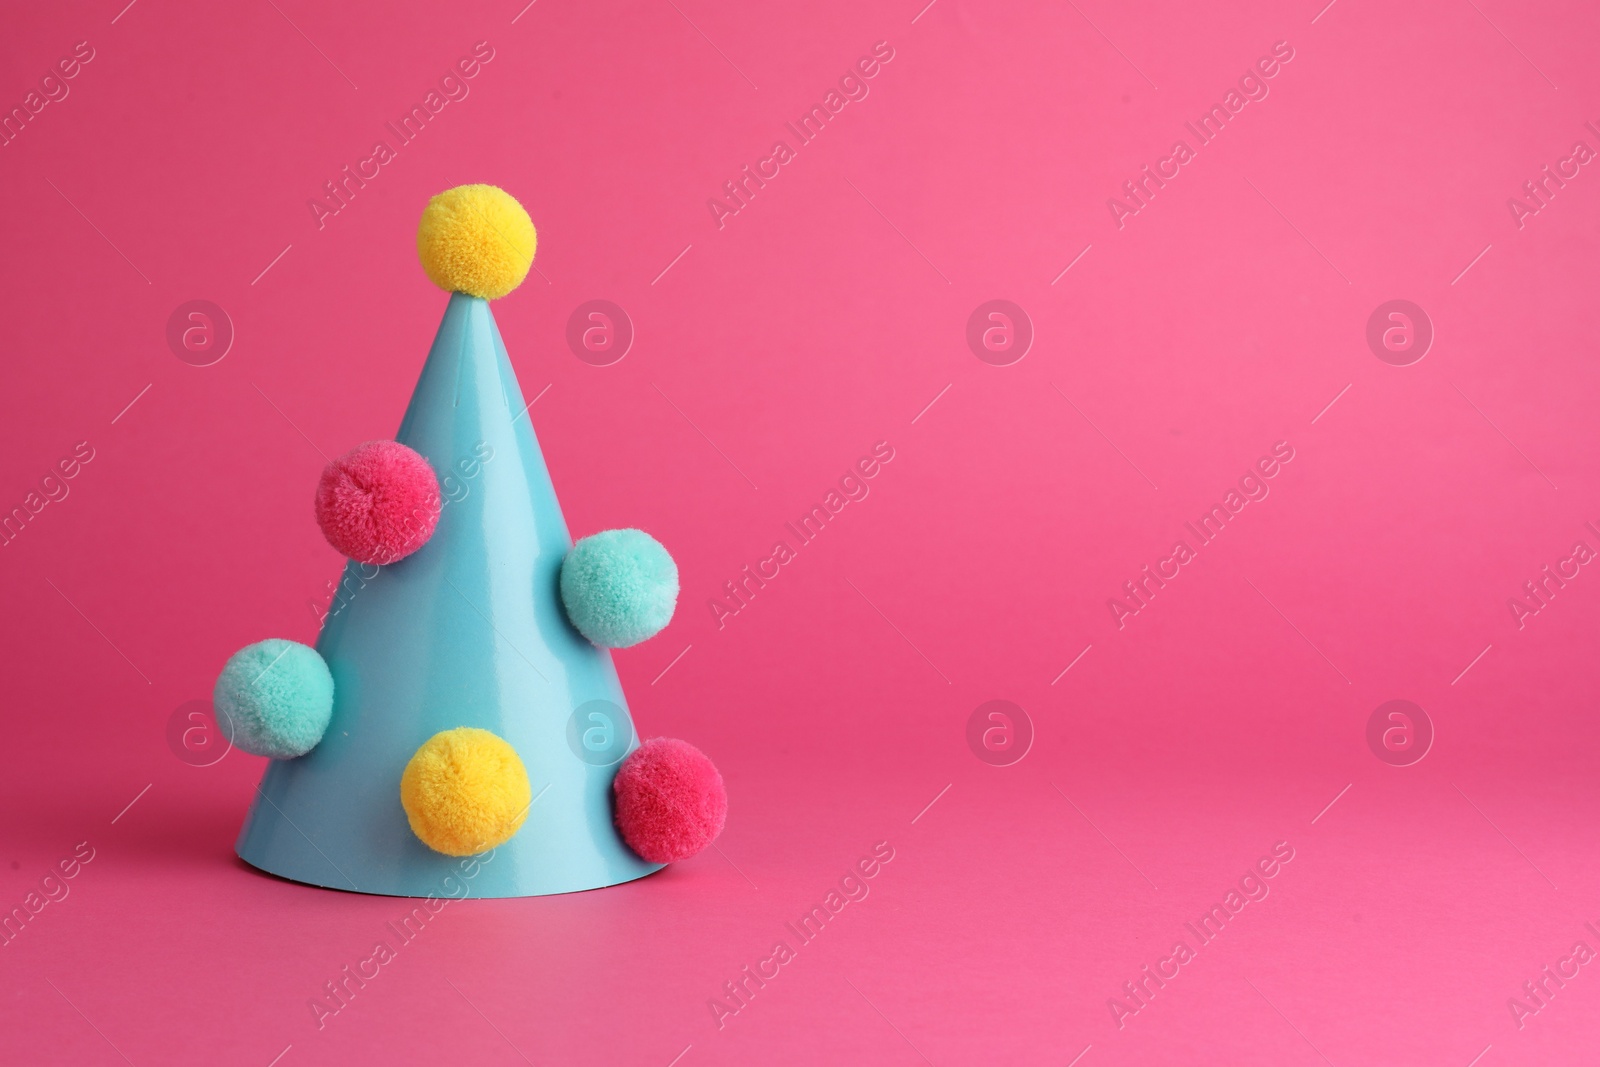 Photo of One light blue party hat with pompoms on pink background. Space for text